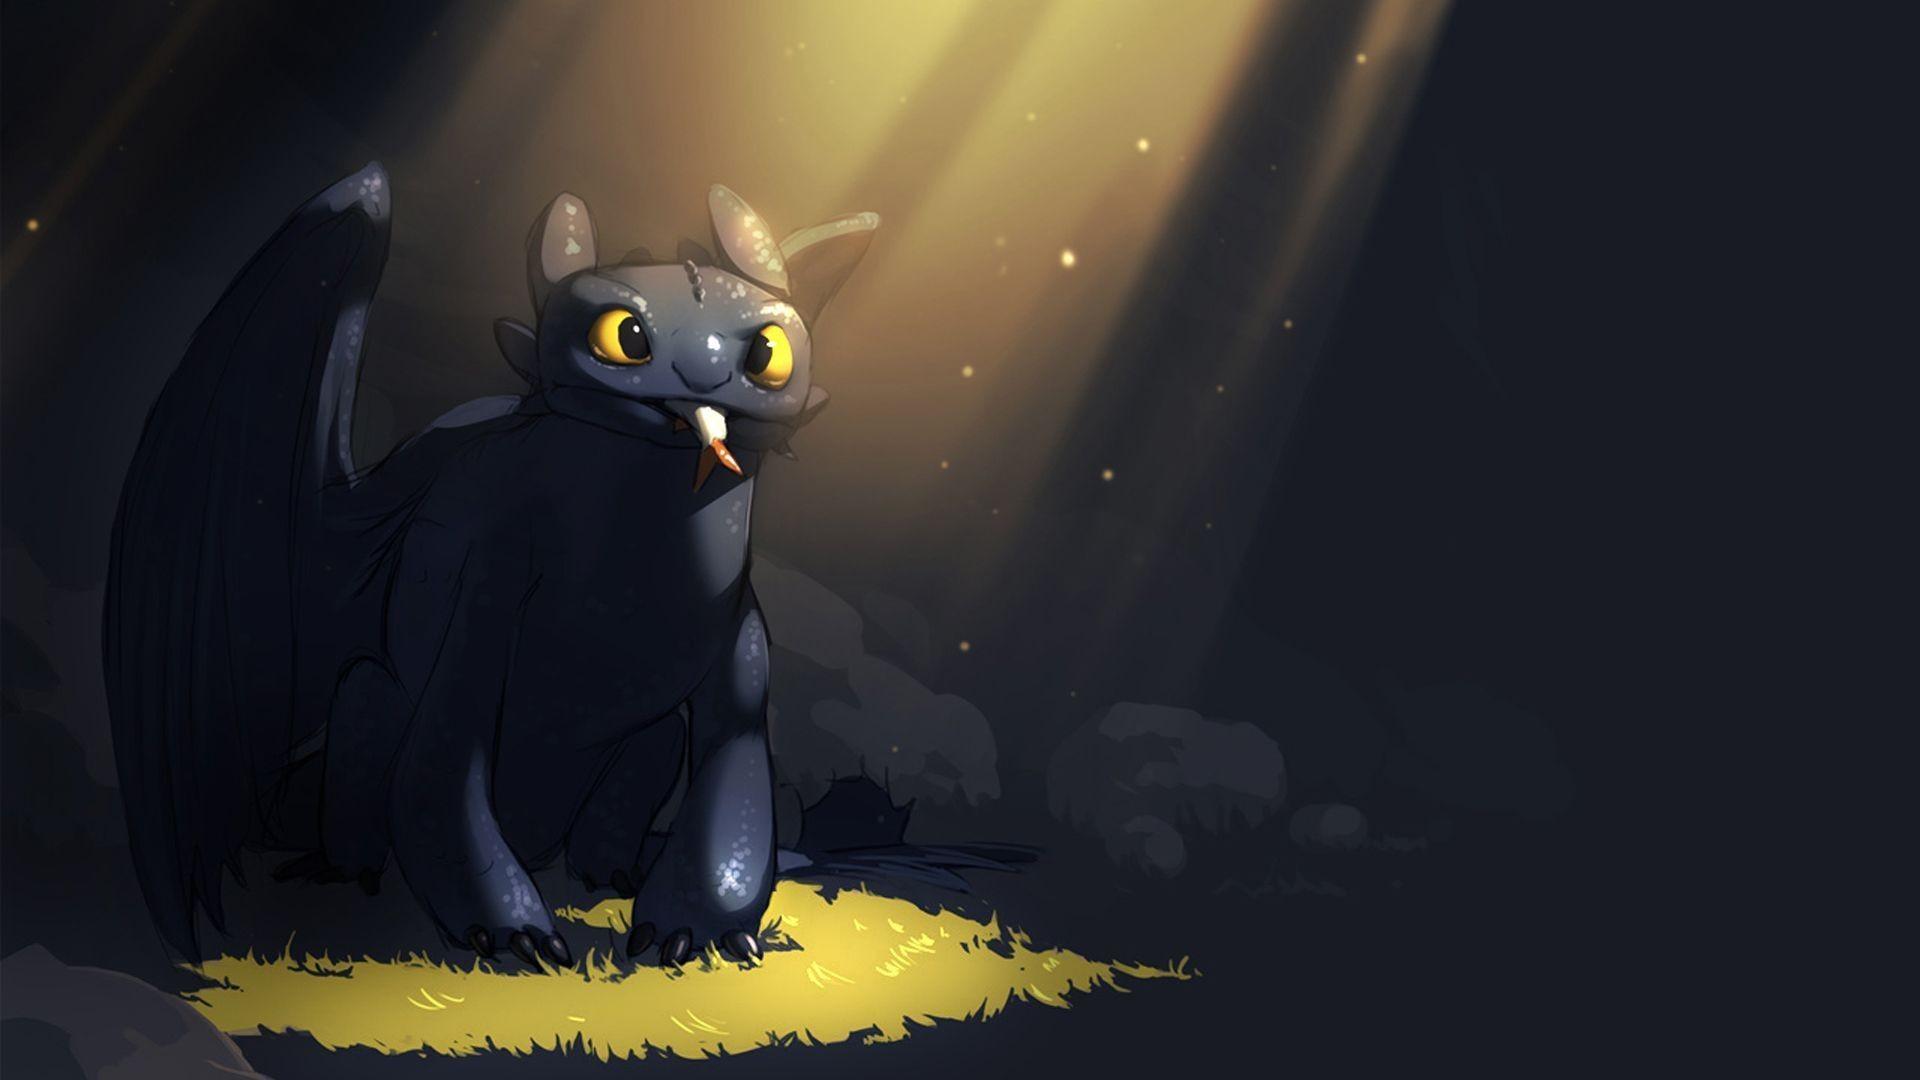 Toothless The Dragon Wallpaper background picture